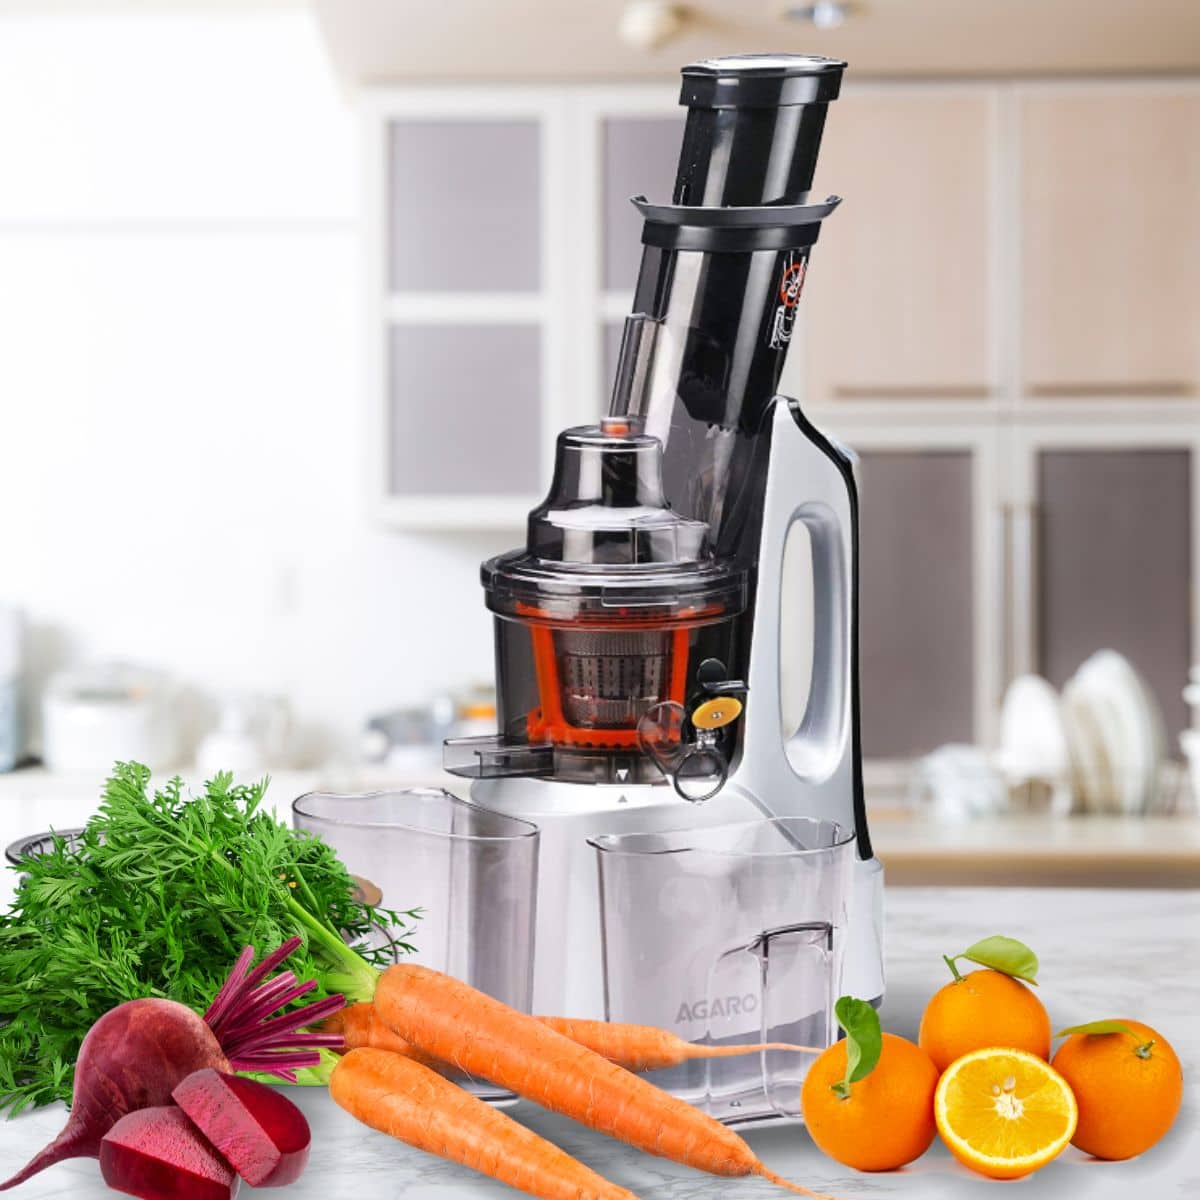 Agaro Imperial cold press slow juicer